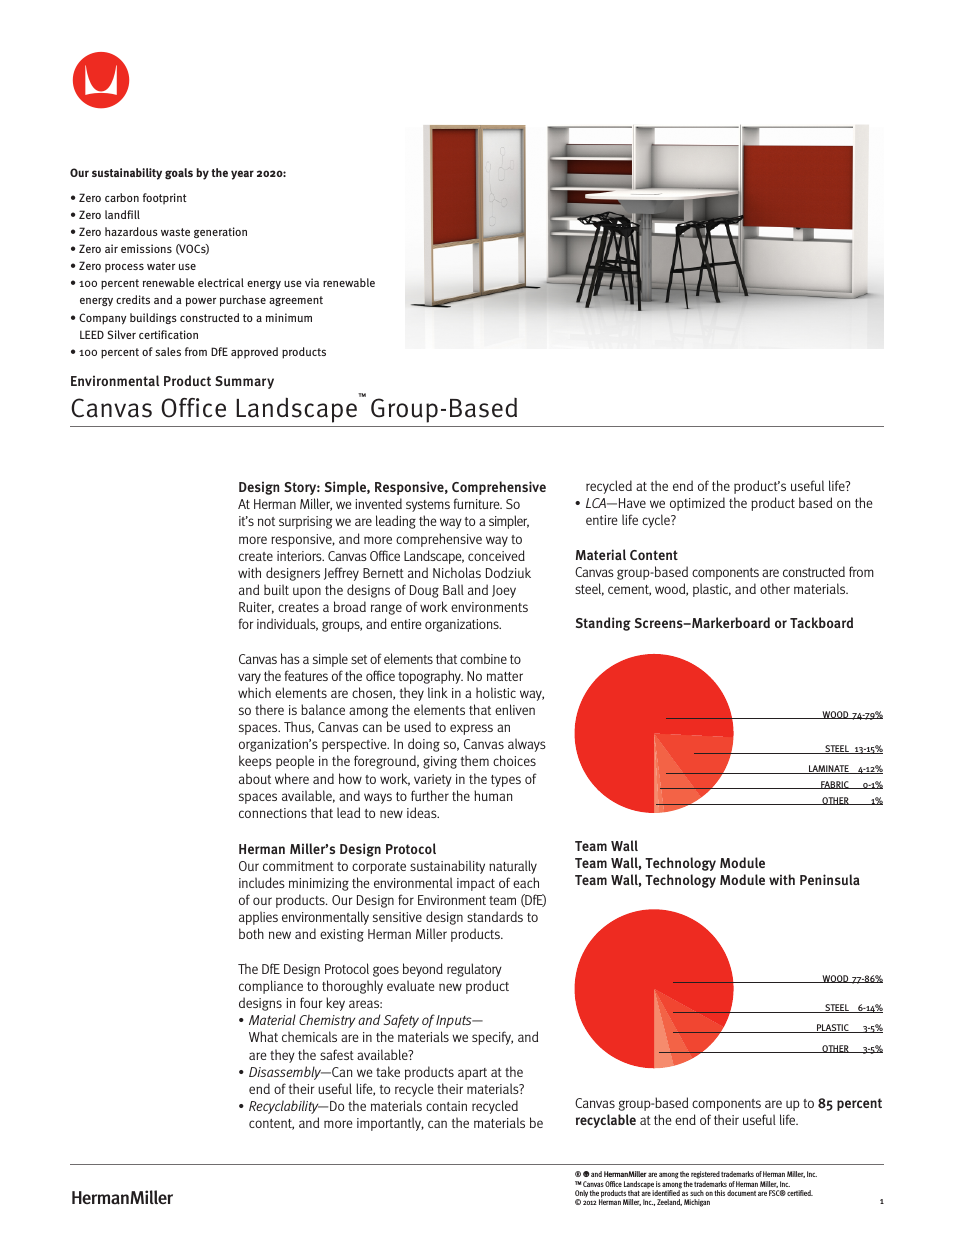 Canvas Office Landscape Group-Based - Environmental Product Summary